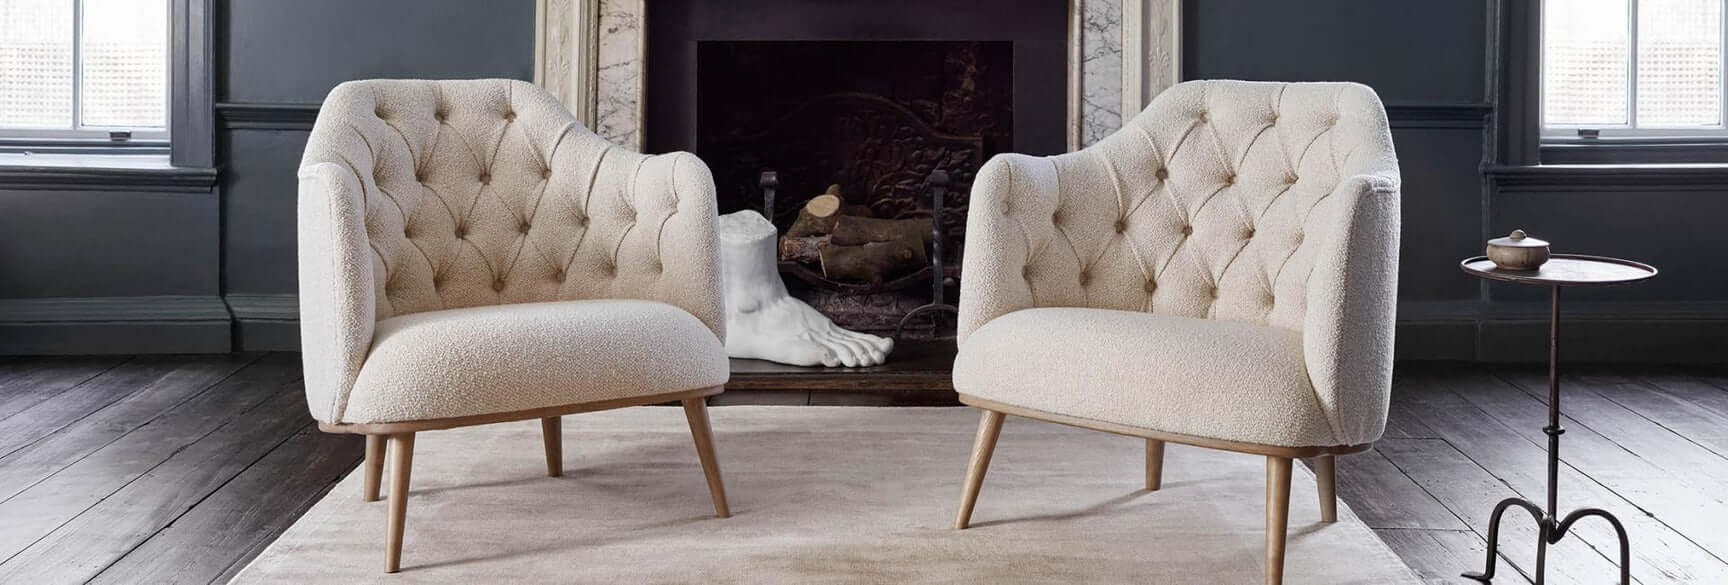 Armchairs & Accent Chairs Upholstered Furniture from Poland in UK